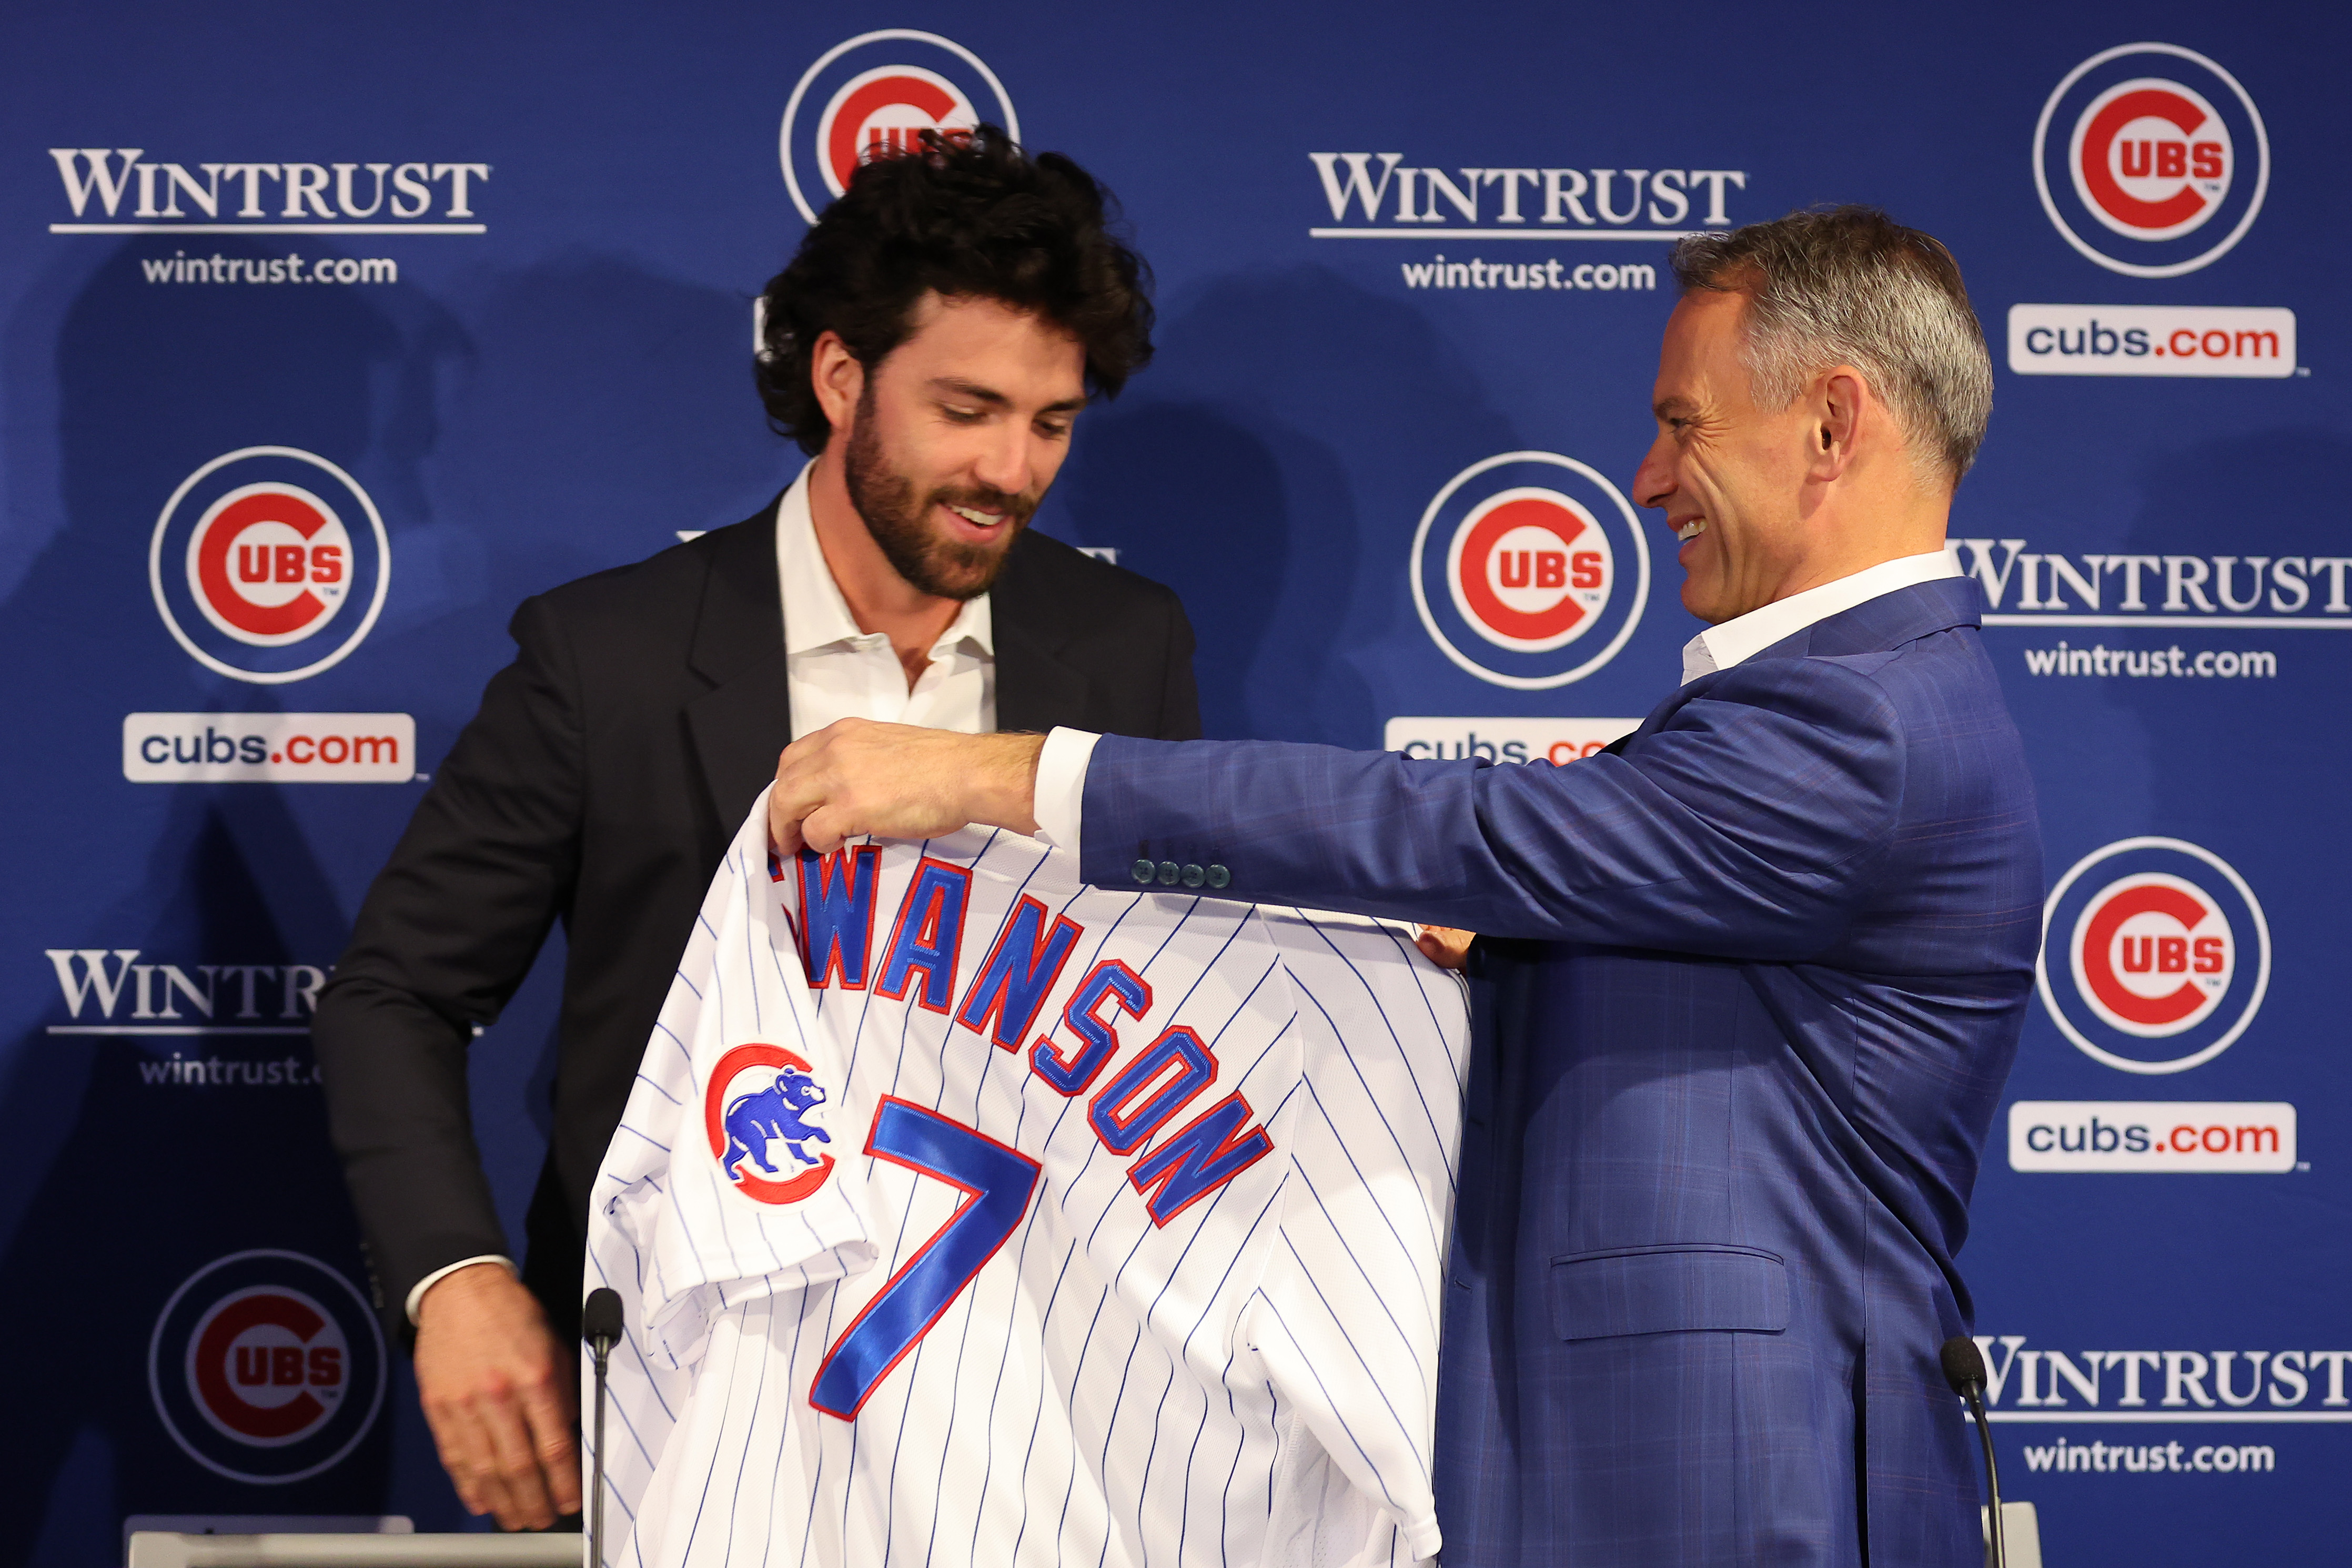 Chicago Cubs Introduce Dansby Swanson